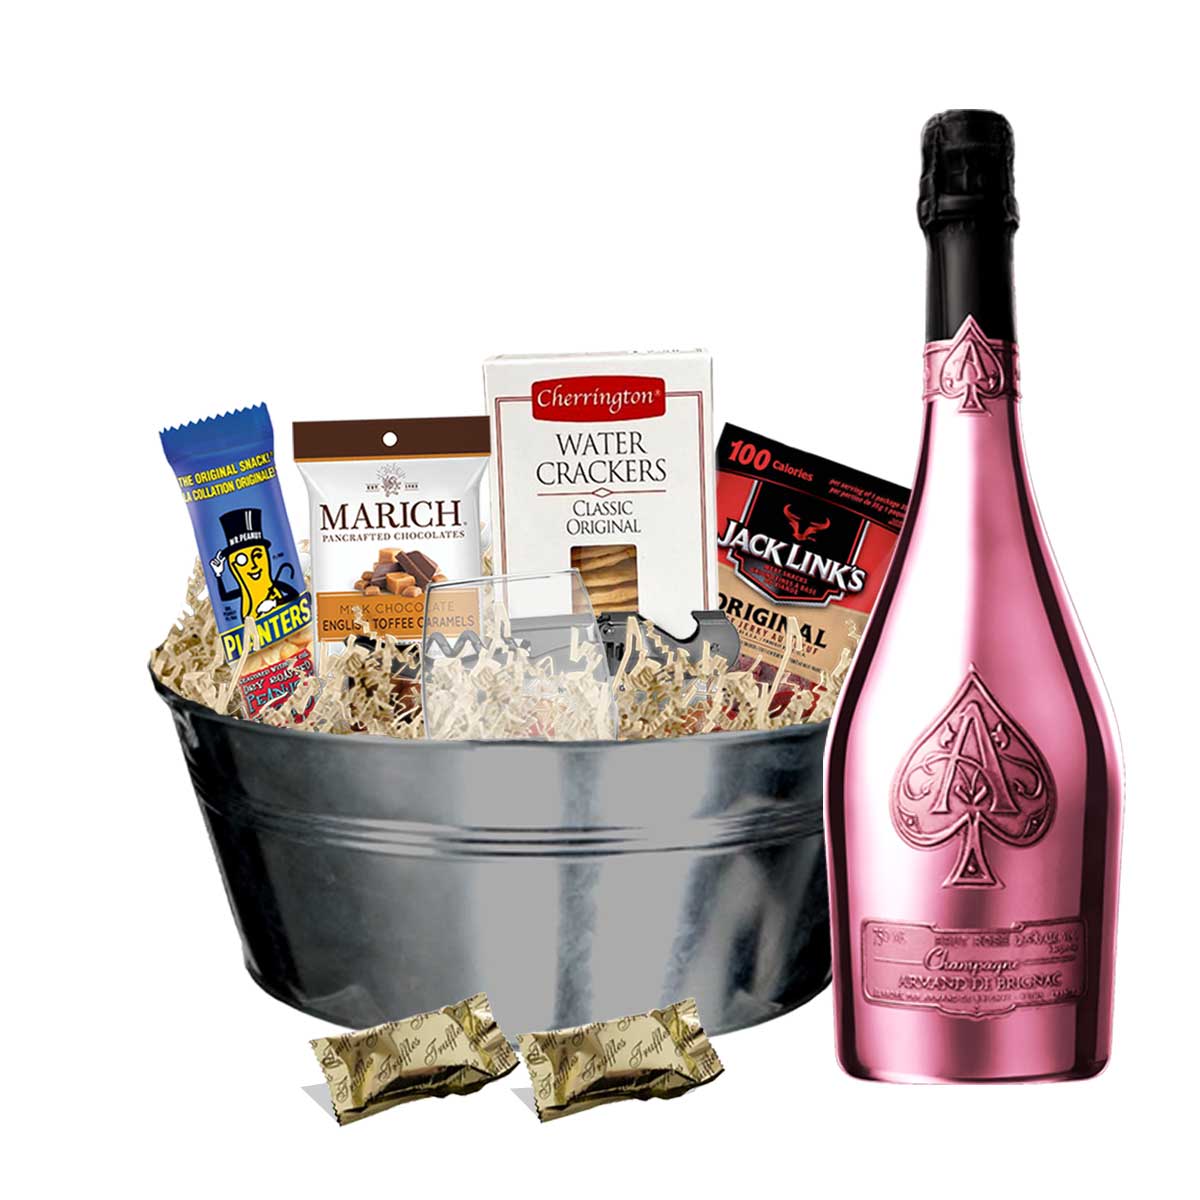 Buy Ace of Spades Demi-Sec Champagne Gift Box Online